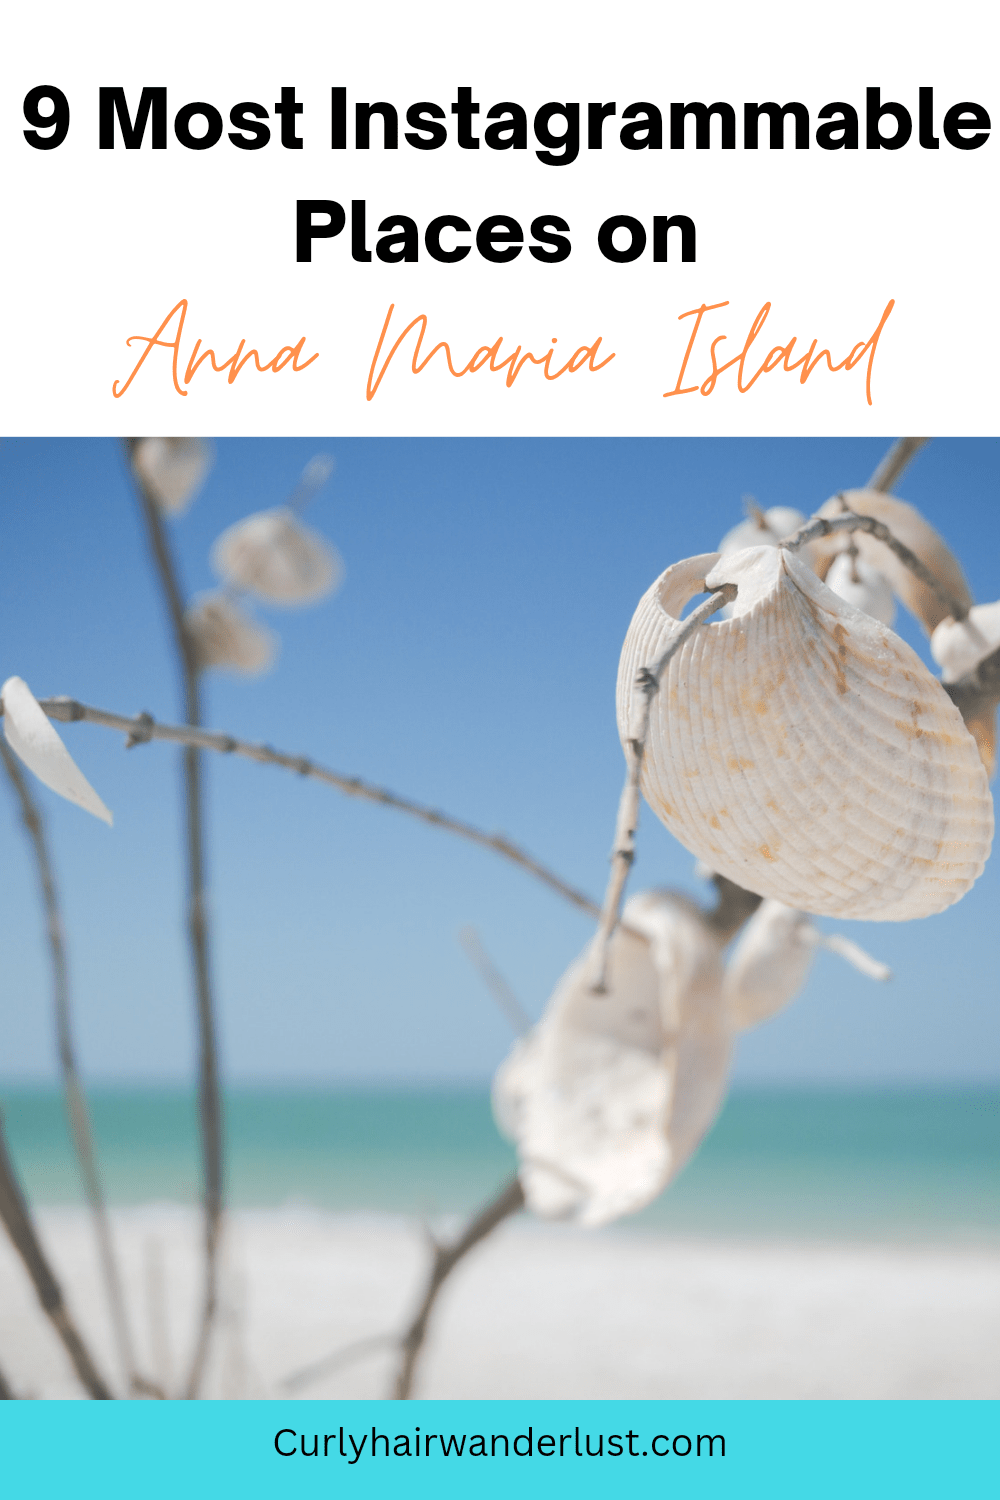 Most instagrammable places on anna Maria island